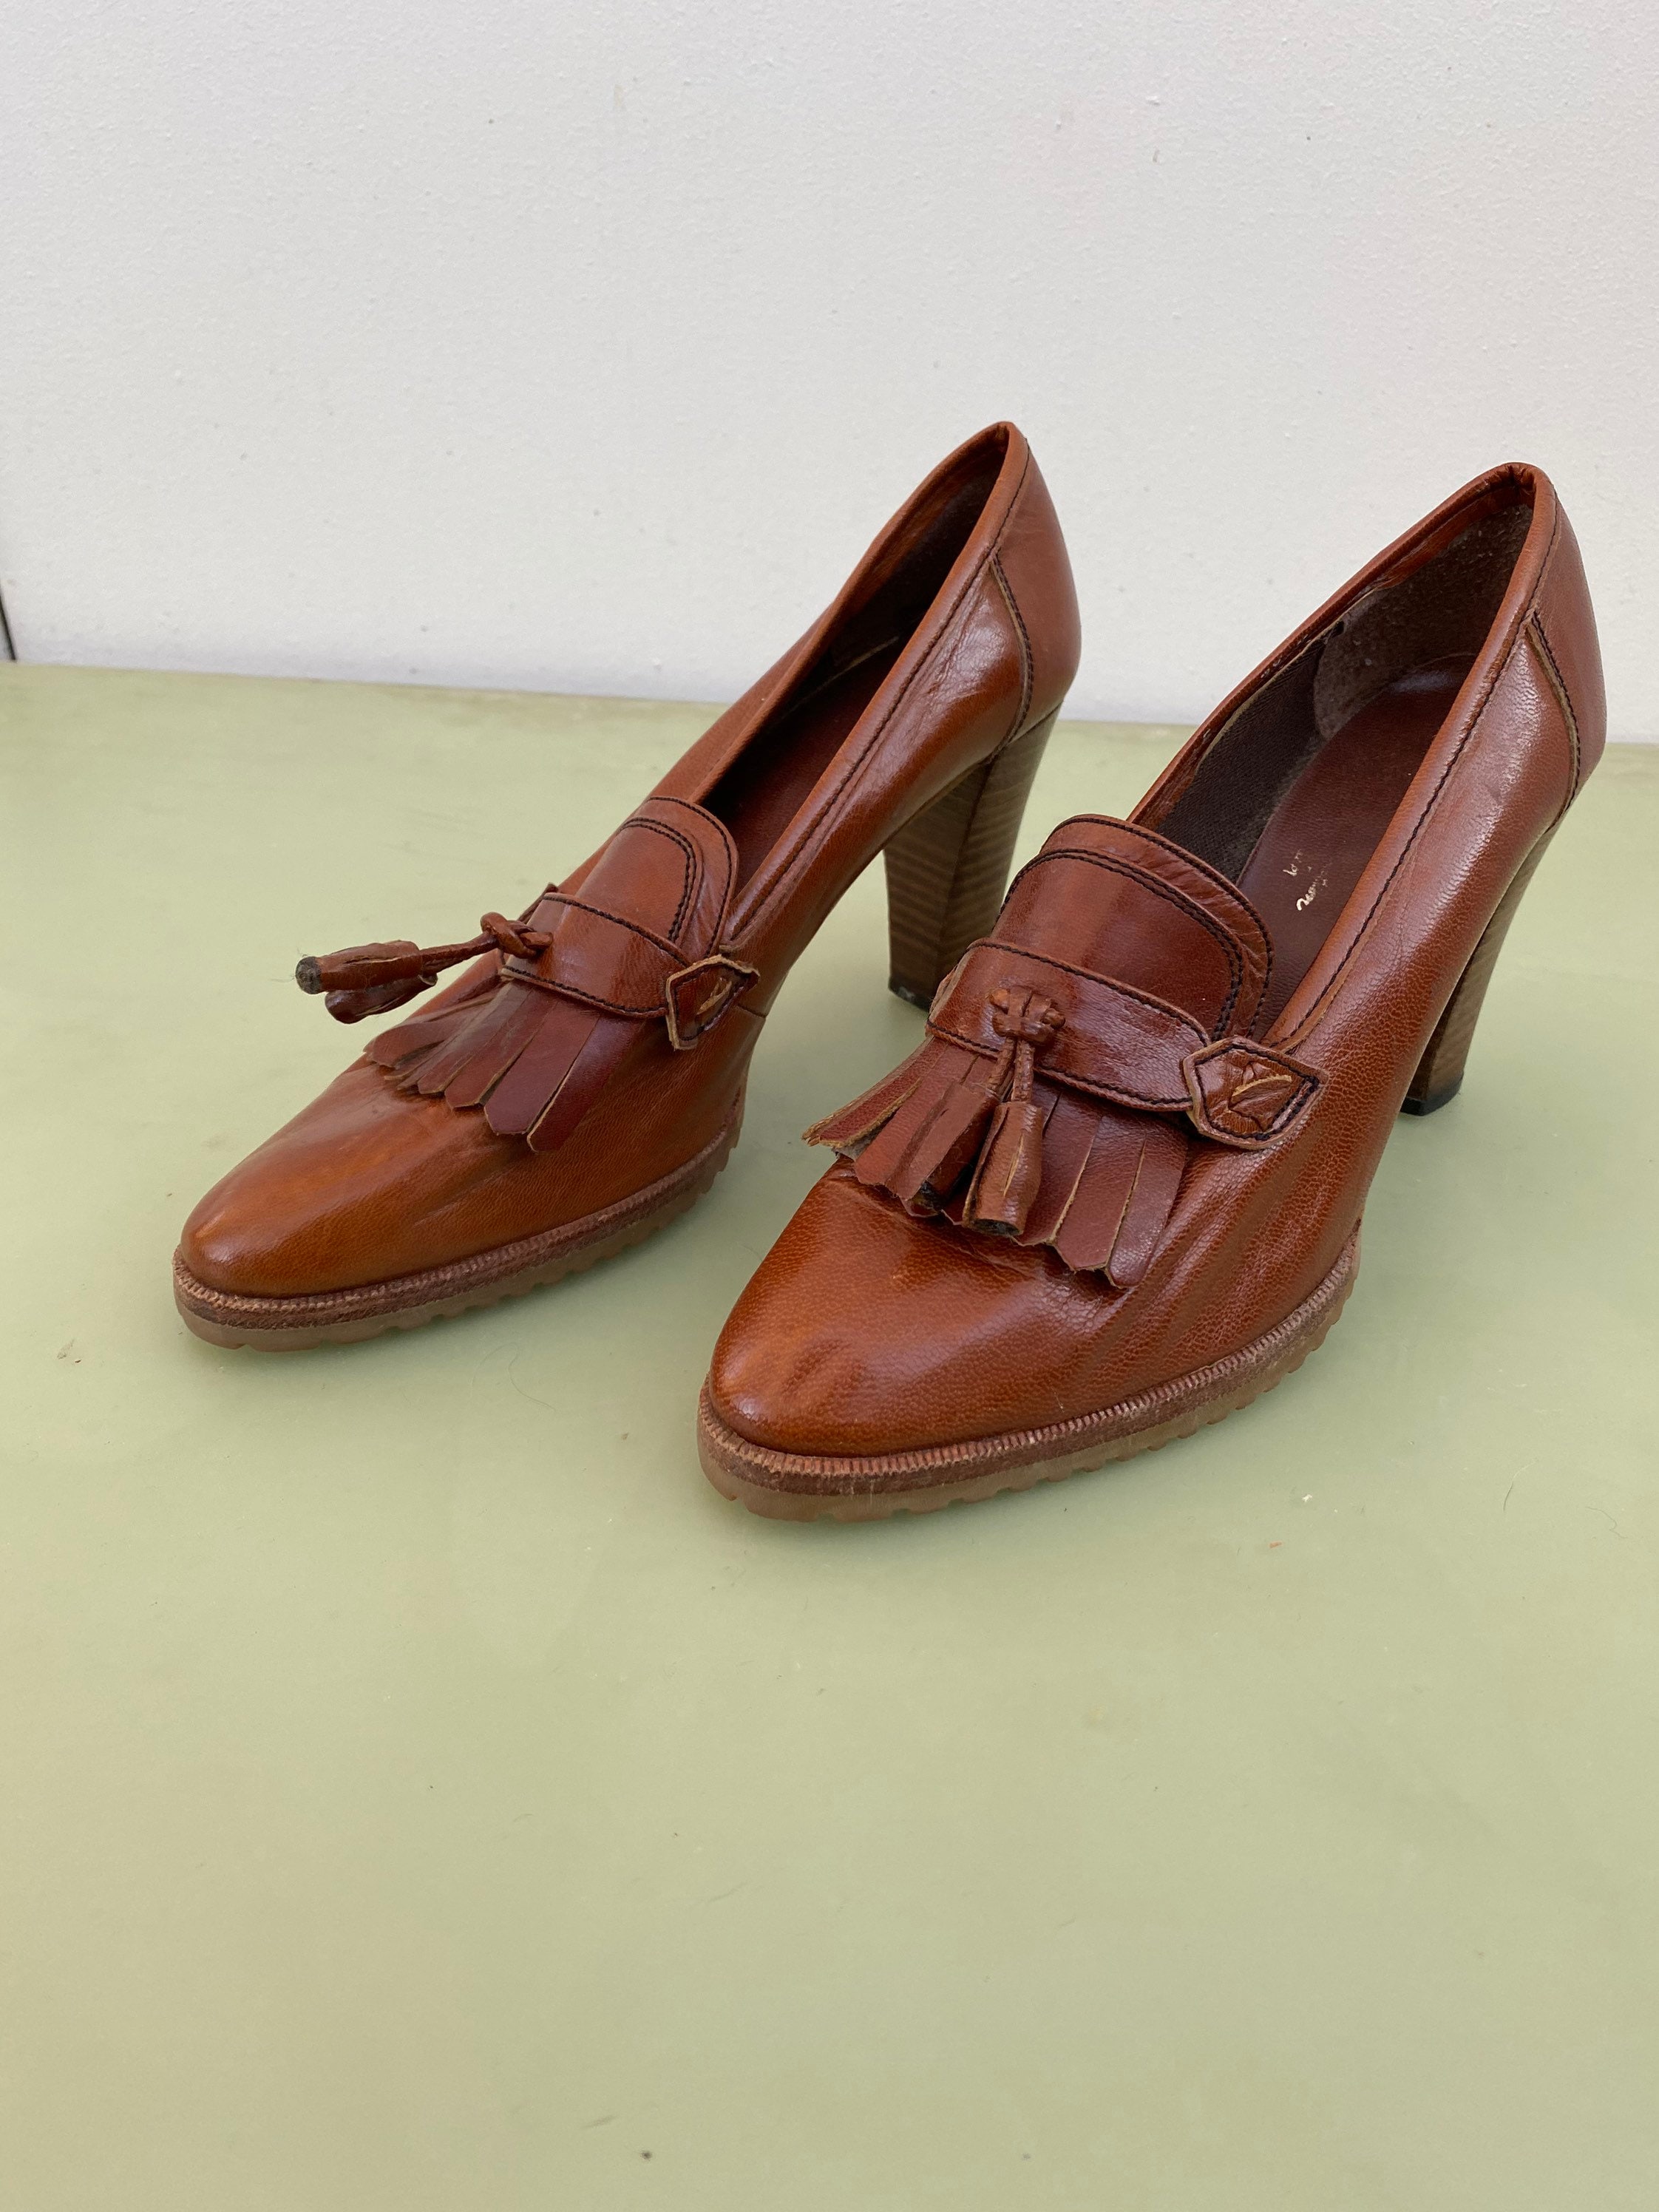 shoes moccasin with fringe heel vintage 1970 brown leather Shoes Womens Shoes Slip Ons Moccasins 